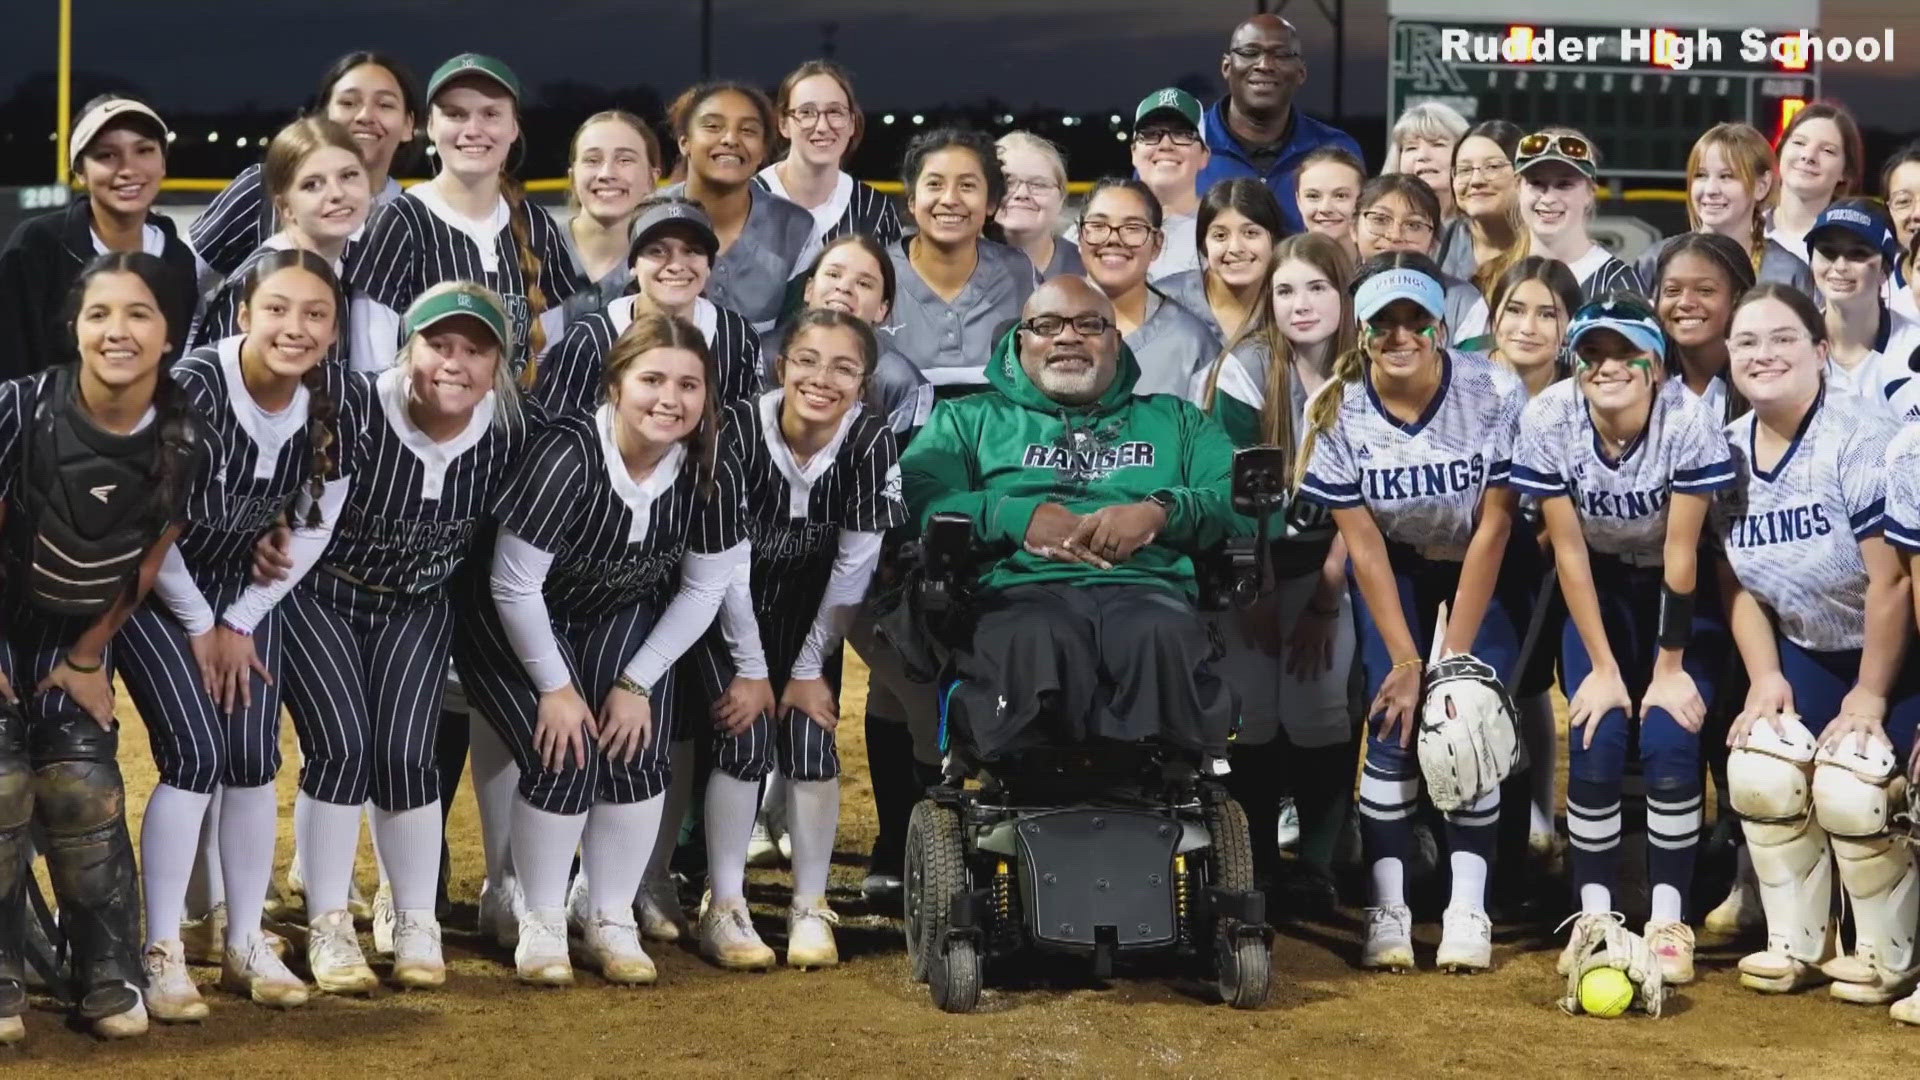 So far, OnRamp has raised $5,000 of their $15,000 goal to help repair a van ramp for Rudder High School coach Calvin Hill, who lost both of his legs in an accident.